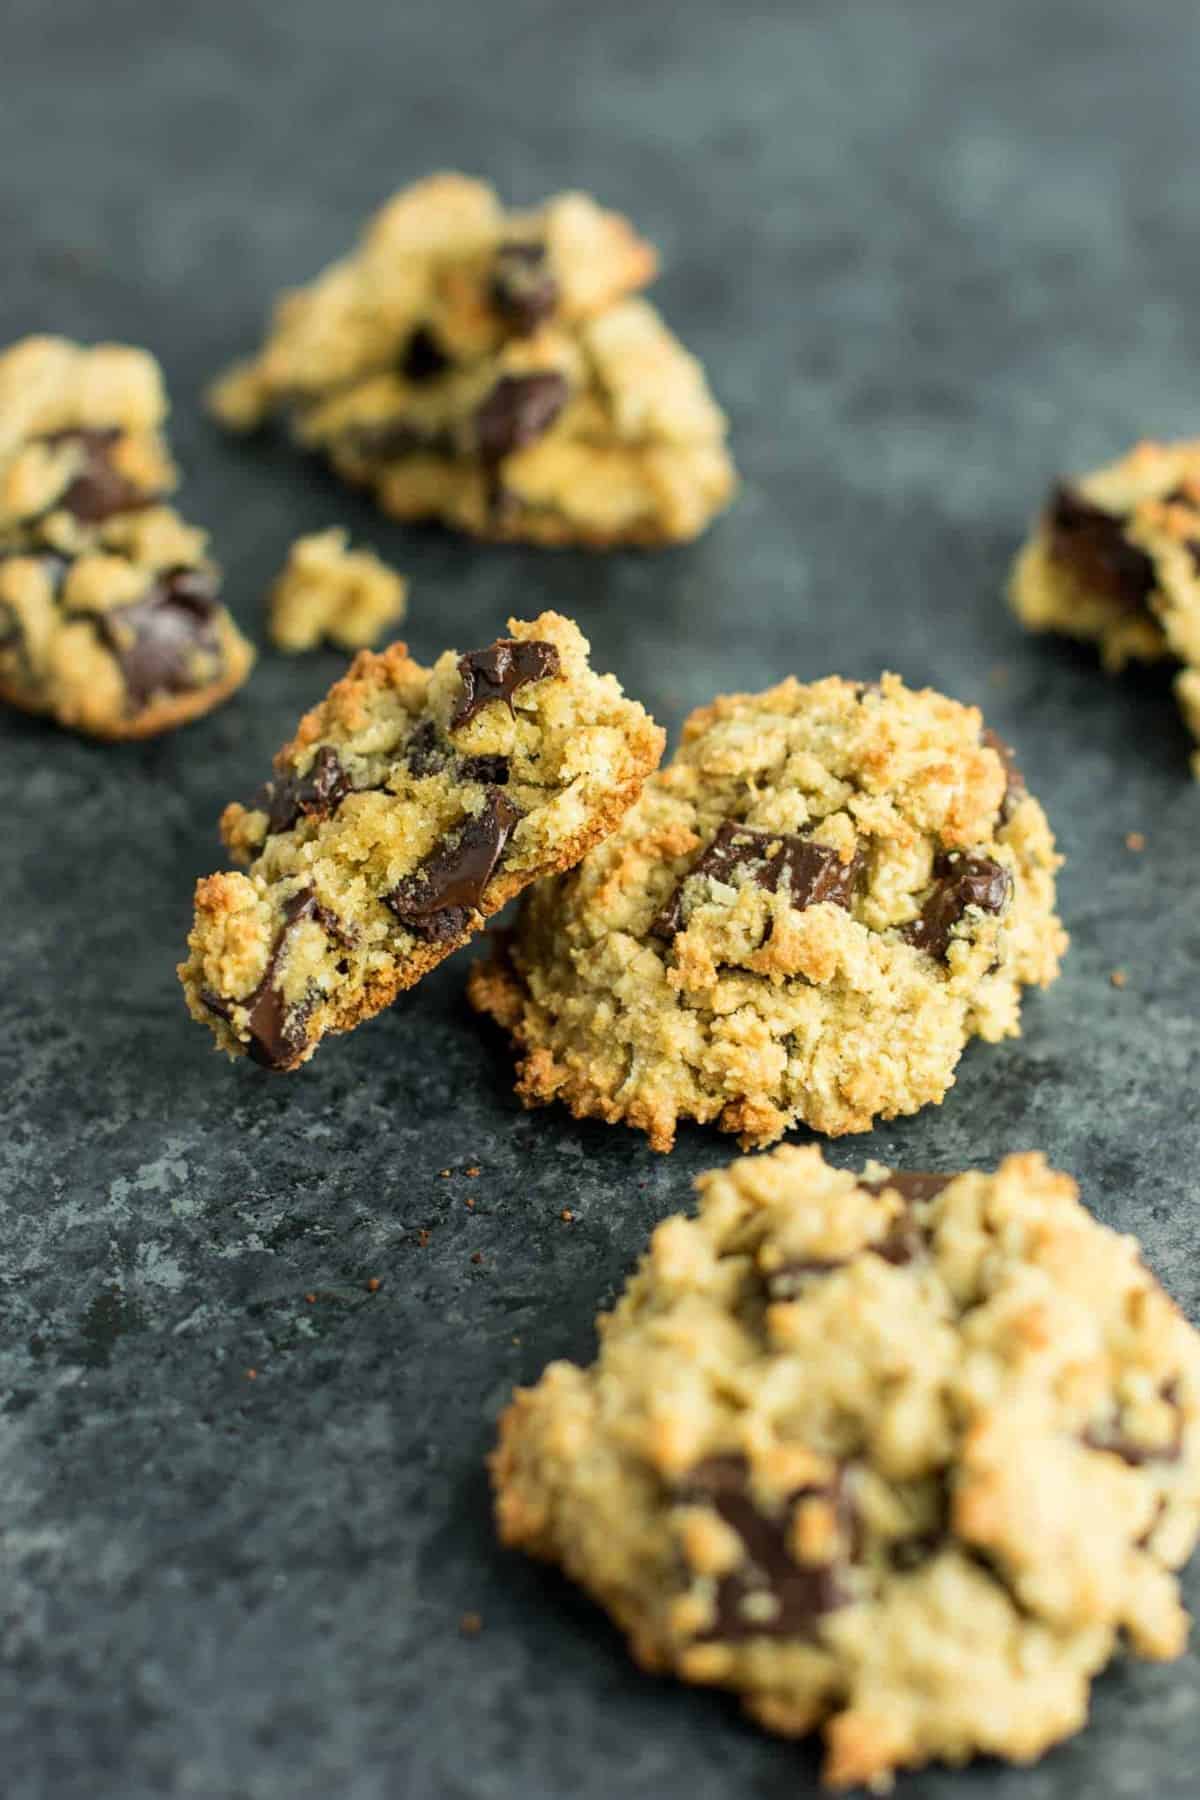 Gluten Free Oatmeal Chocolate Chip Cookies recipe made with oat flour and coconut flour. An easy, healthy, and delicious cookie recipe made using easy to find and inexpensive gluten free flours. #glutenfree #oatmealchocolatechip #healthy #cookies